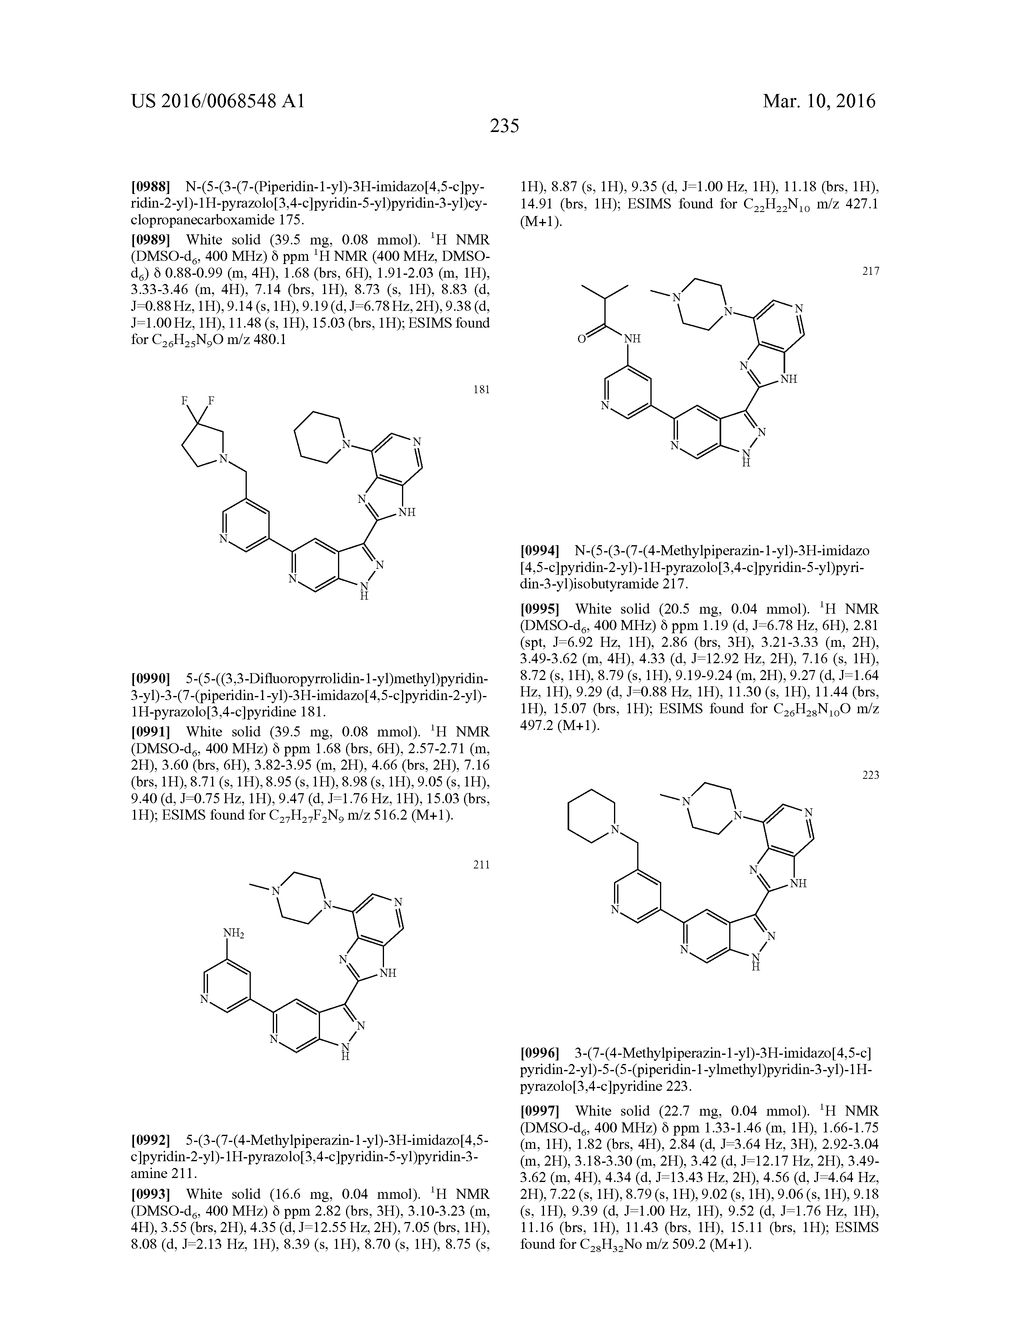 3-(3H-IMIDAZO[4,5-C]PYRIDIN-2-YL)-1H-PYRAZOLO[3,4-C]PYRIDINE AND     THERAPEUTIC USES THEREOF - diagram, schematic, and image 236